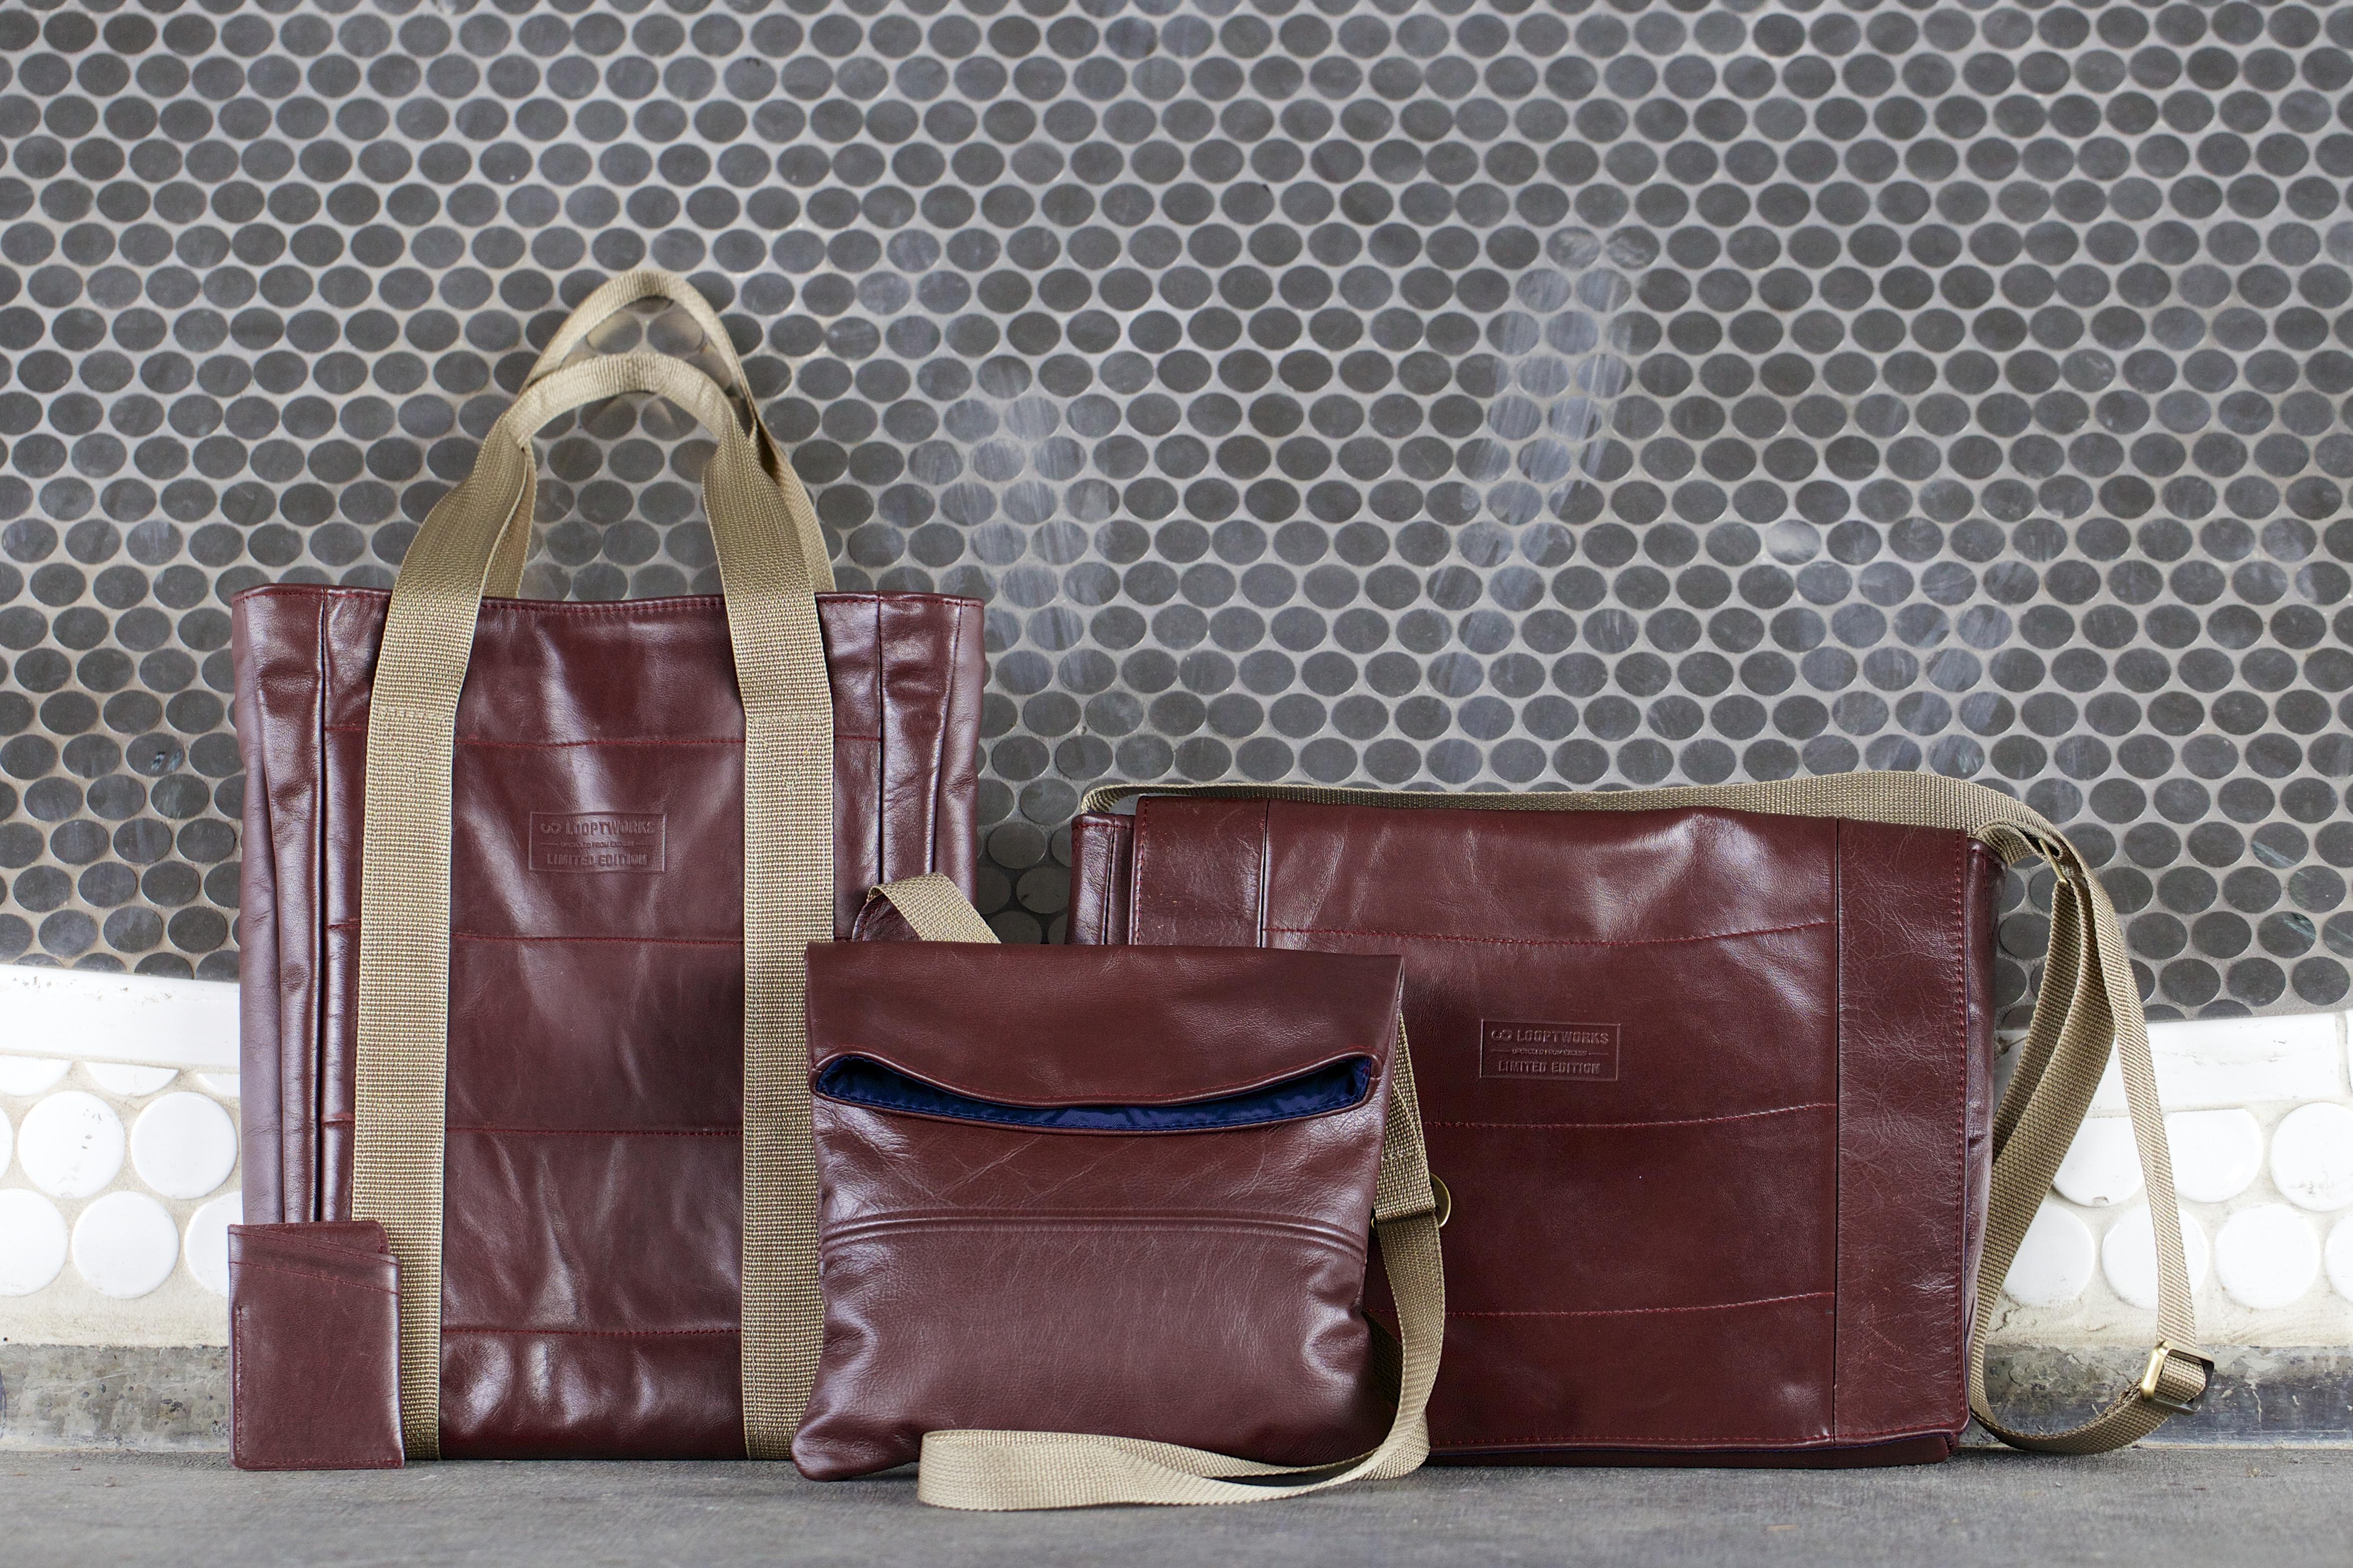 Reborn as carry-on bags, recycled airplane seat leather will continue to  fly - Alaska Airlines News